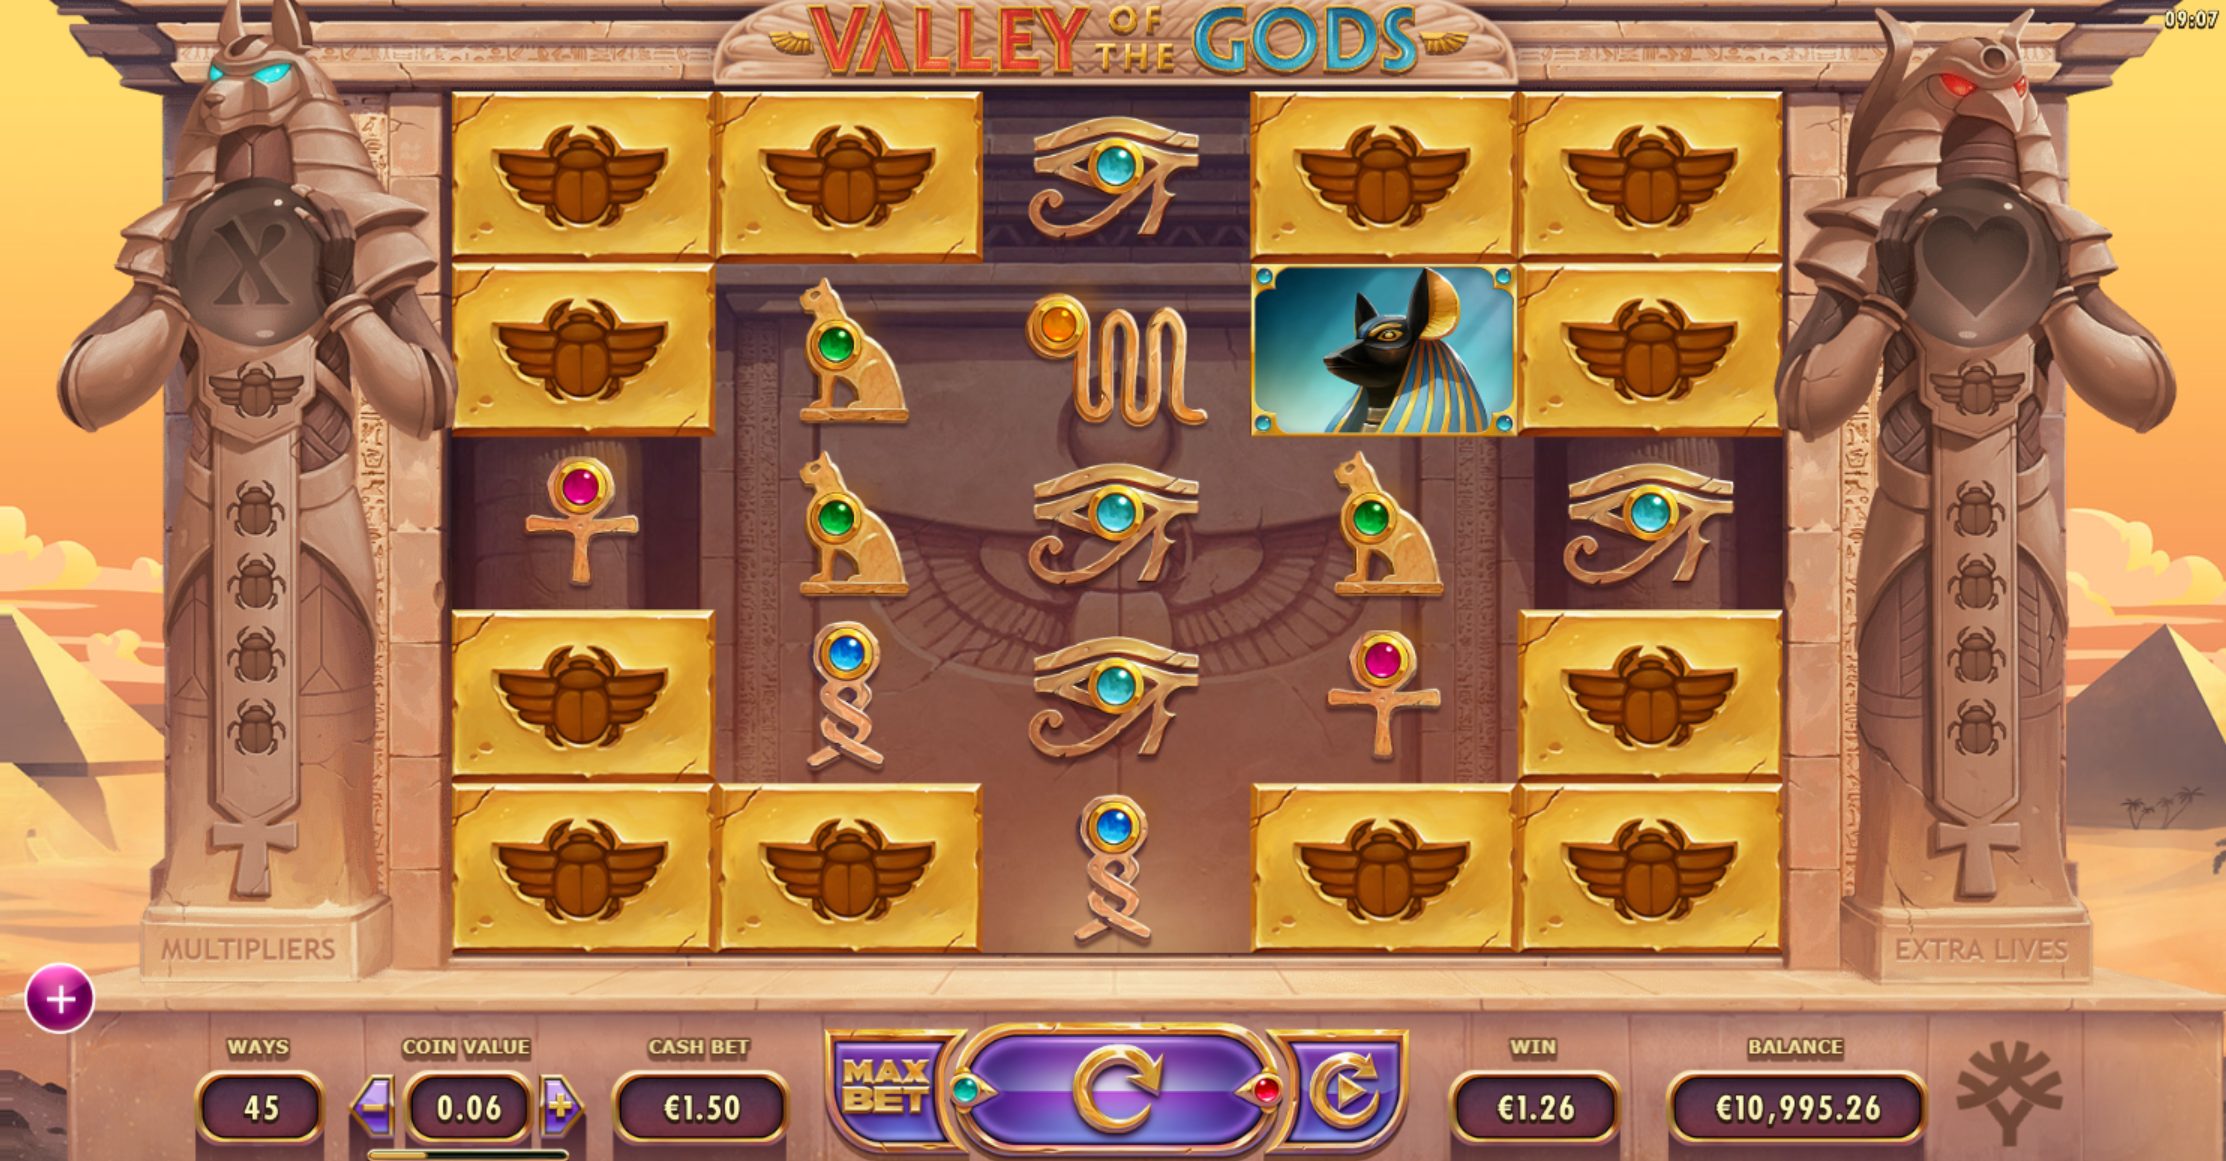 Yggdrasil Gaming games on LuckyConnect casino content aggregation solution: Valley of the Gods